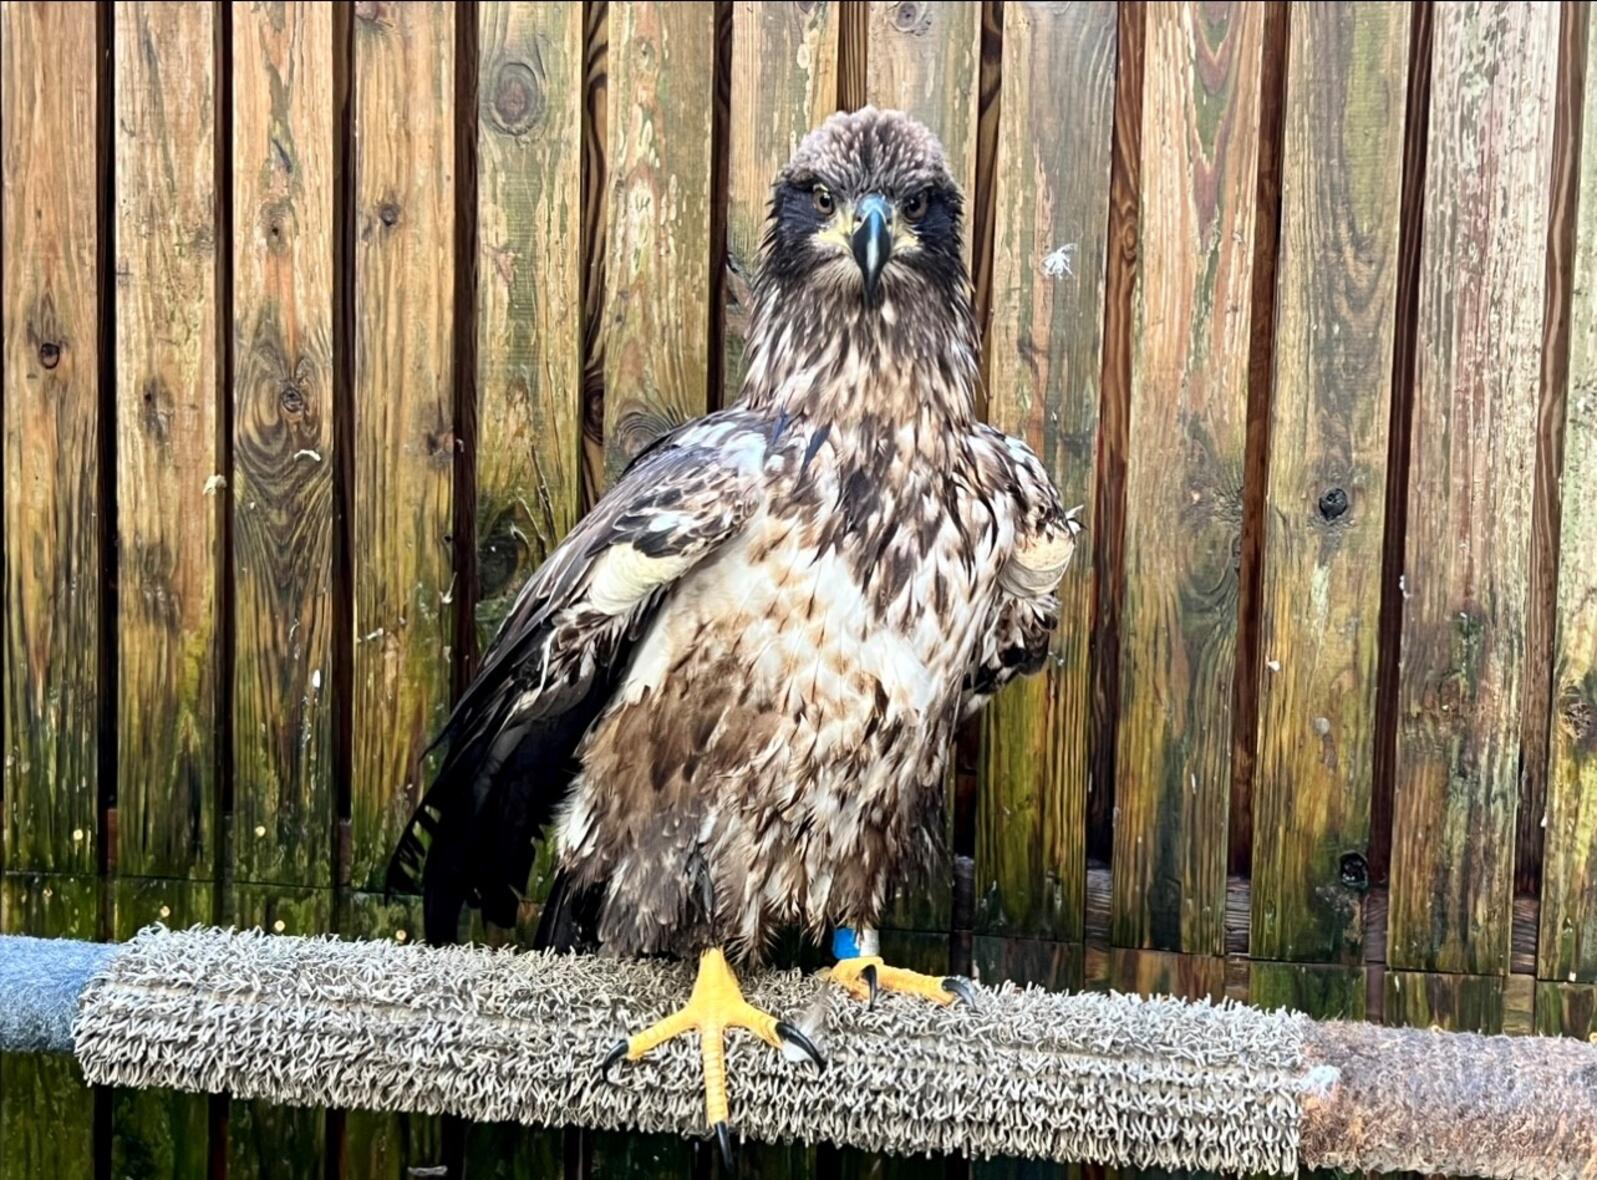 A juvenile Bald Eagle stands in a kennel in the Raptor Trauma Clinic.